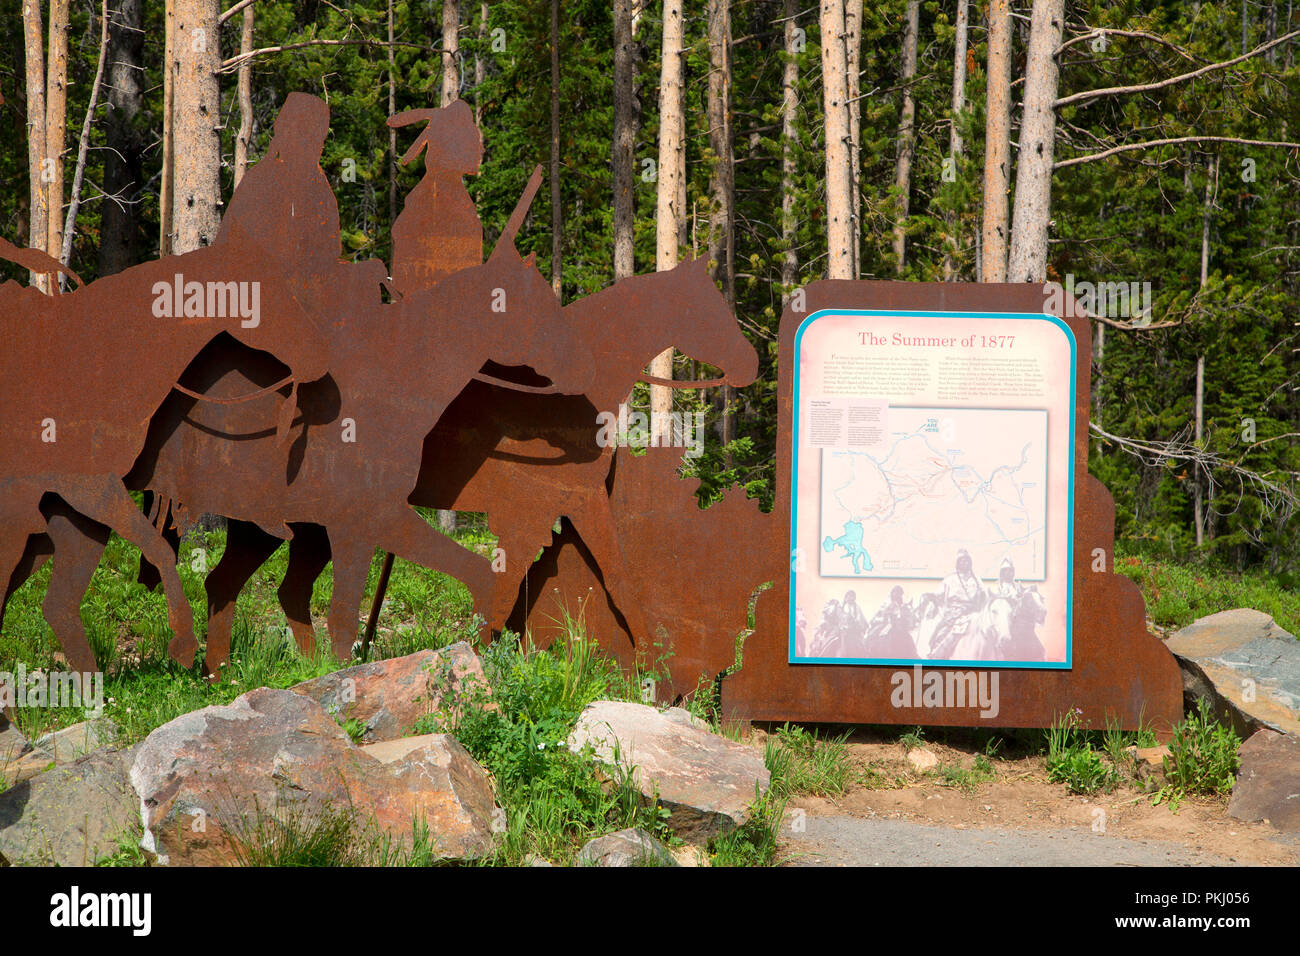 Silhouette sculpture with Interpretive board, Nez Perce (Nee-Me-Poo) National Historic Trail, Gallatin National Forest, Beartooth Scenic Byway,  Monta Stock Photo